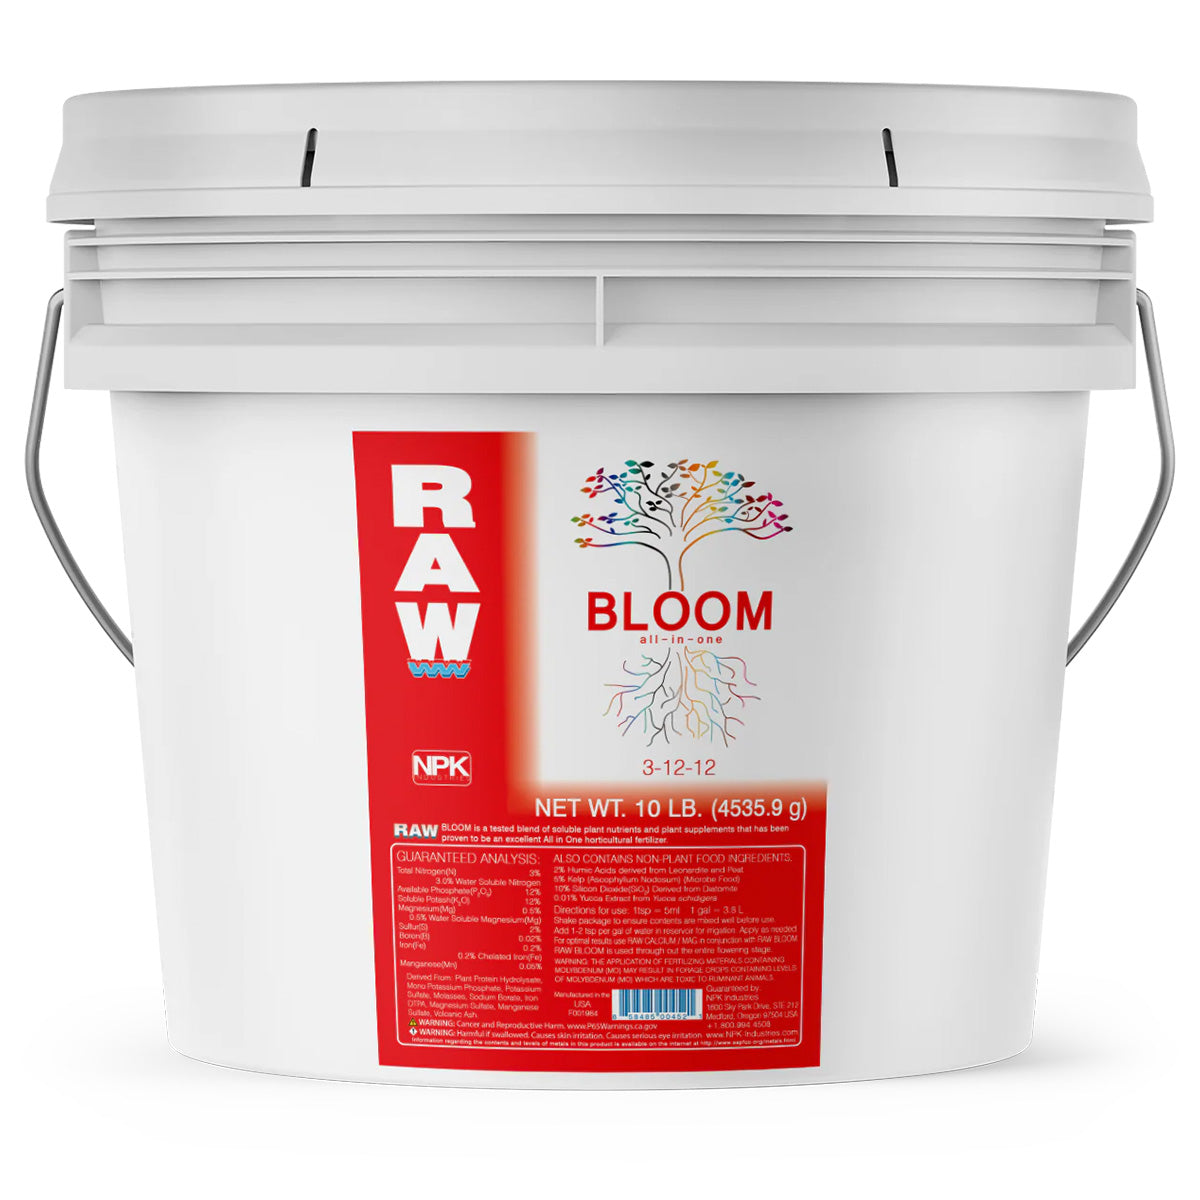 Raw Nutrients - Bloom Complete